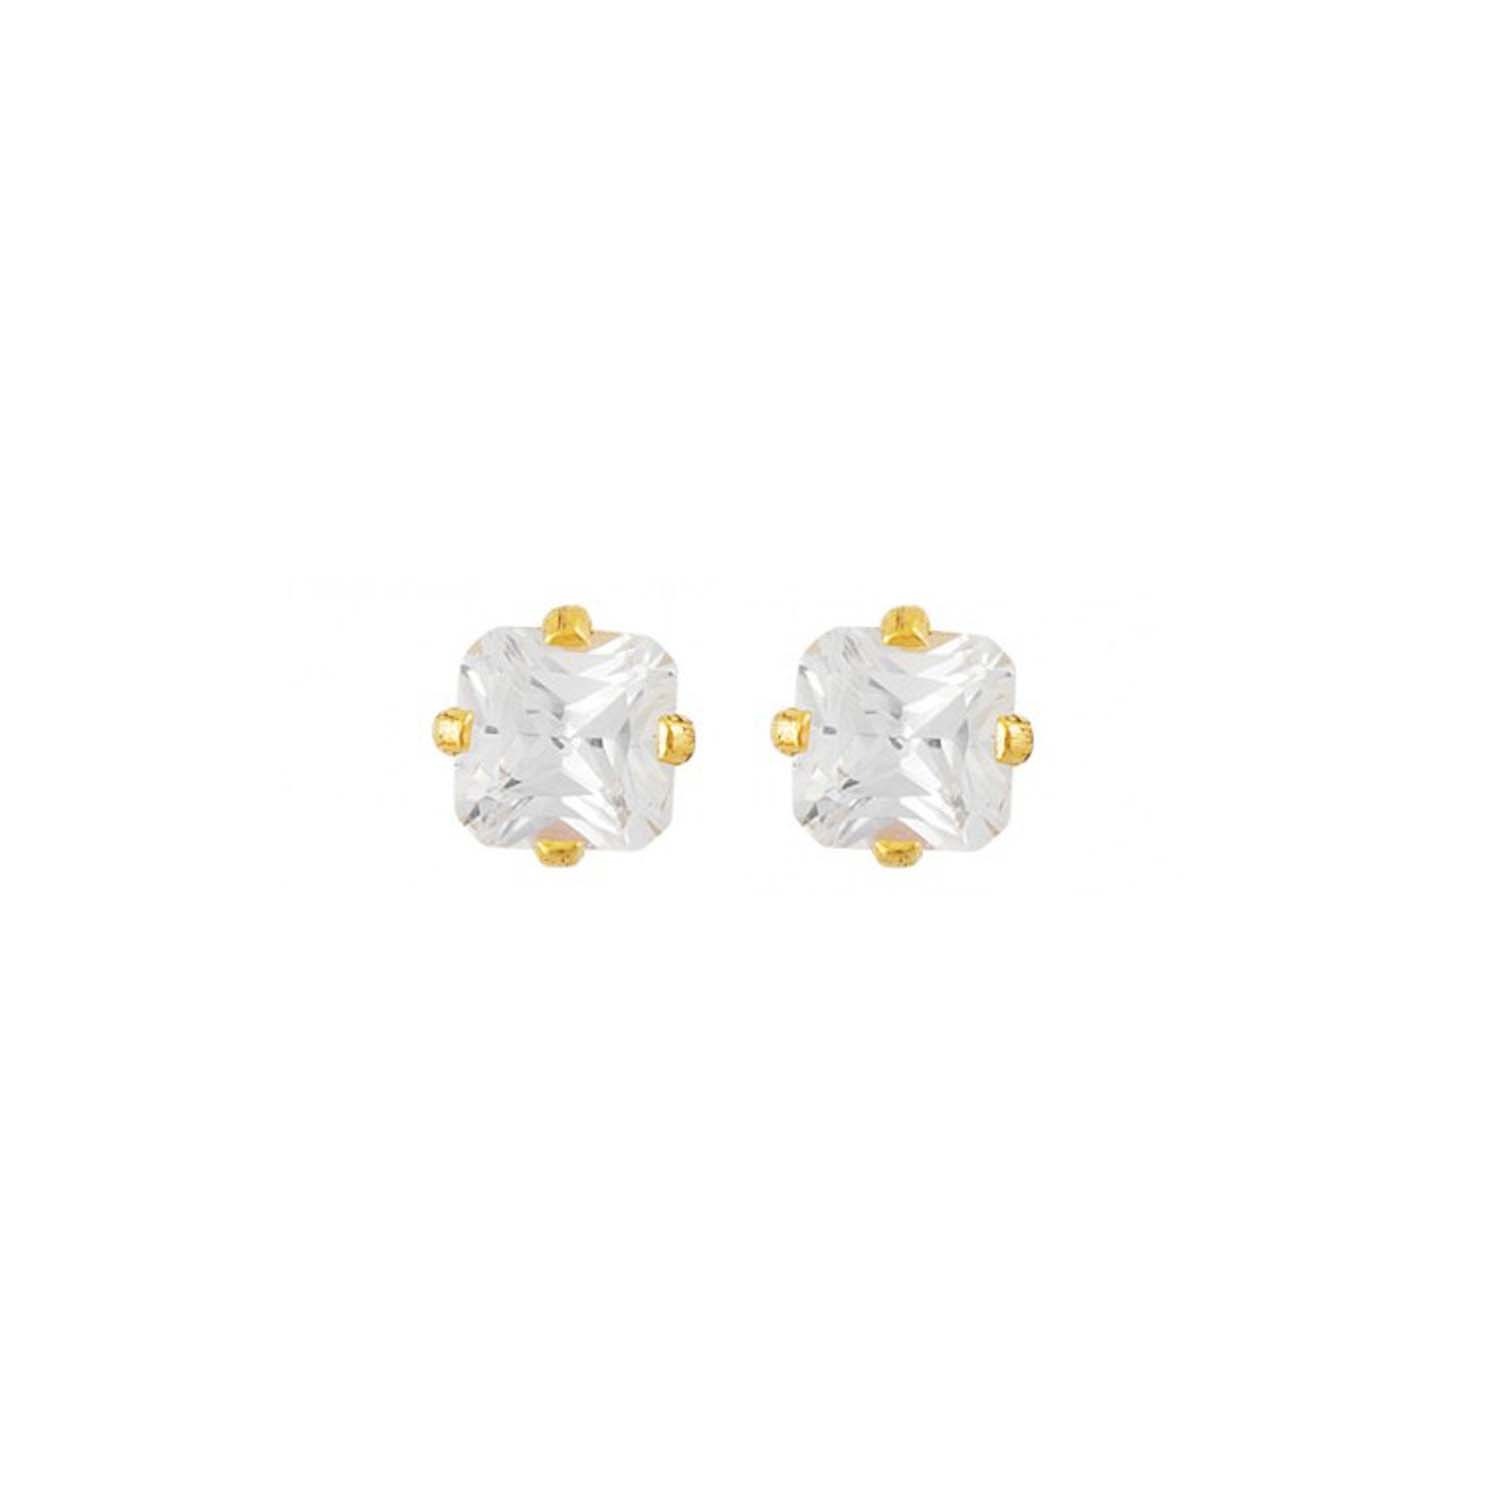 4*4MM - Princess Cut Cubic Zirconia (Square) - Crystal Clear | 24K Gold Plated Simple Yet Stylish, Cute & Trending Fashion Earrings / Ear Studs for Girls & Women Online @ Pakistan | Studex Sensitive (for daily wear)